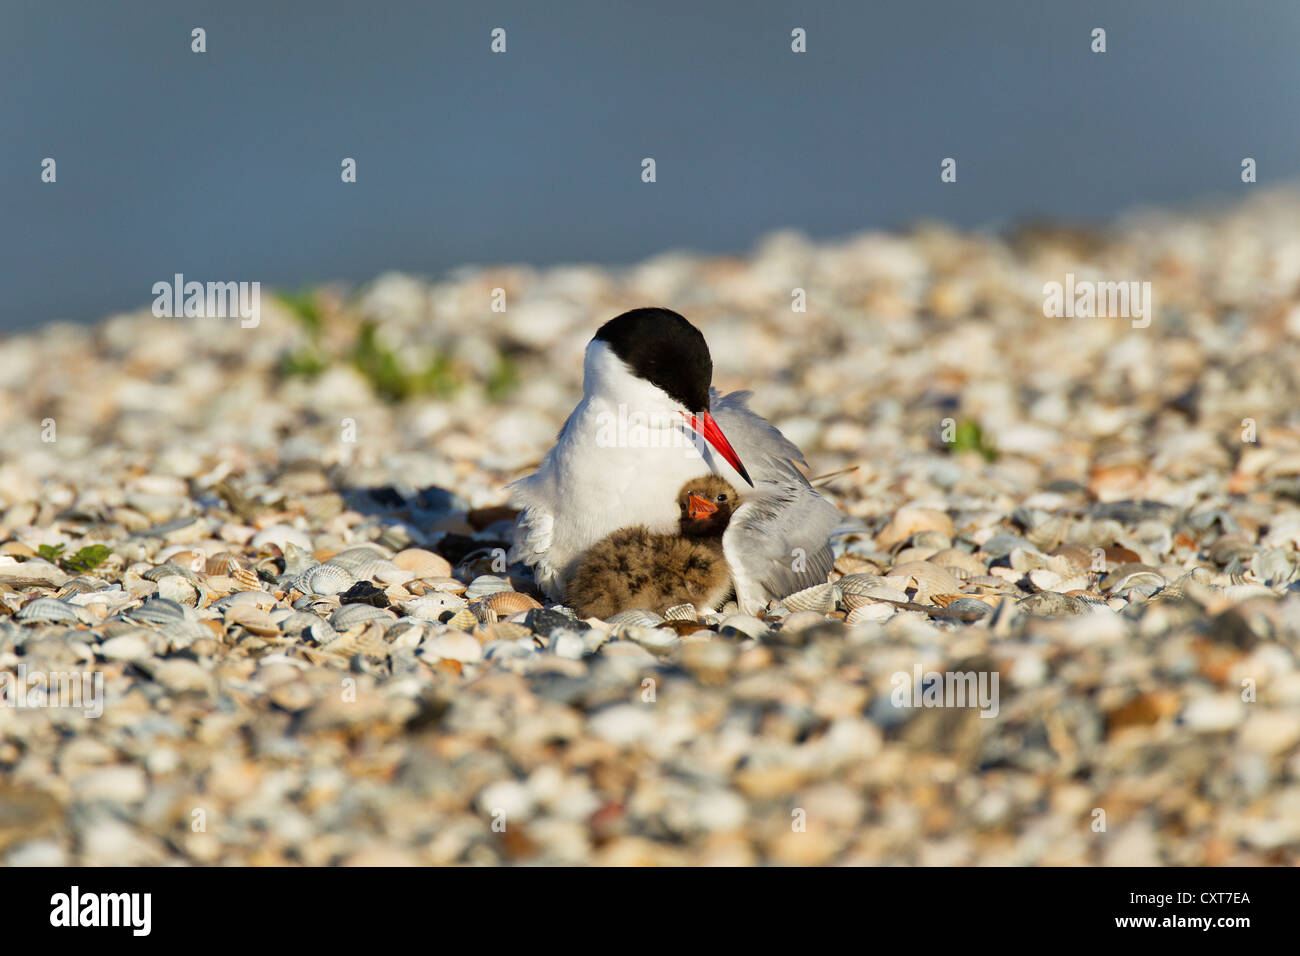 Common Tern (Sterna hirundo) with a chick, Texel, The Netherlands, Europe Stock Photo